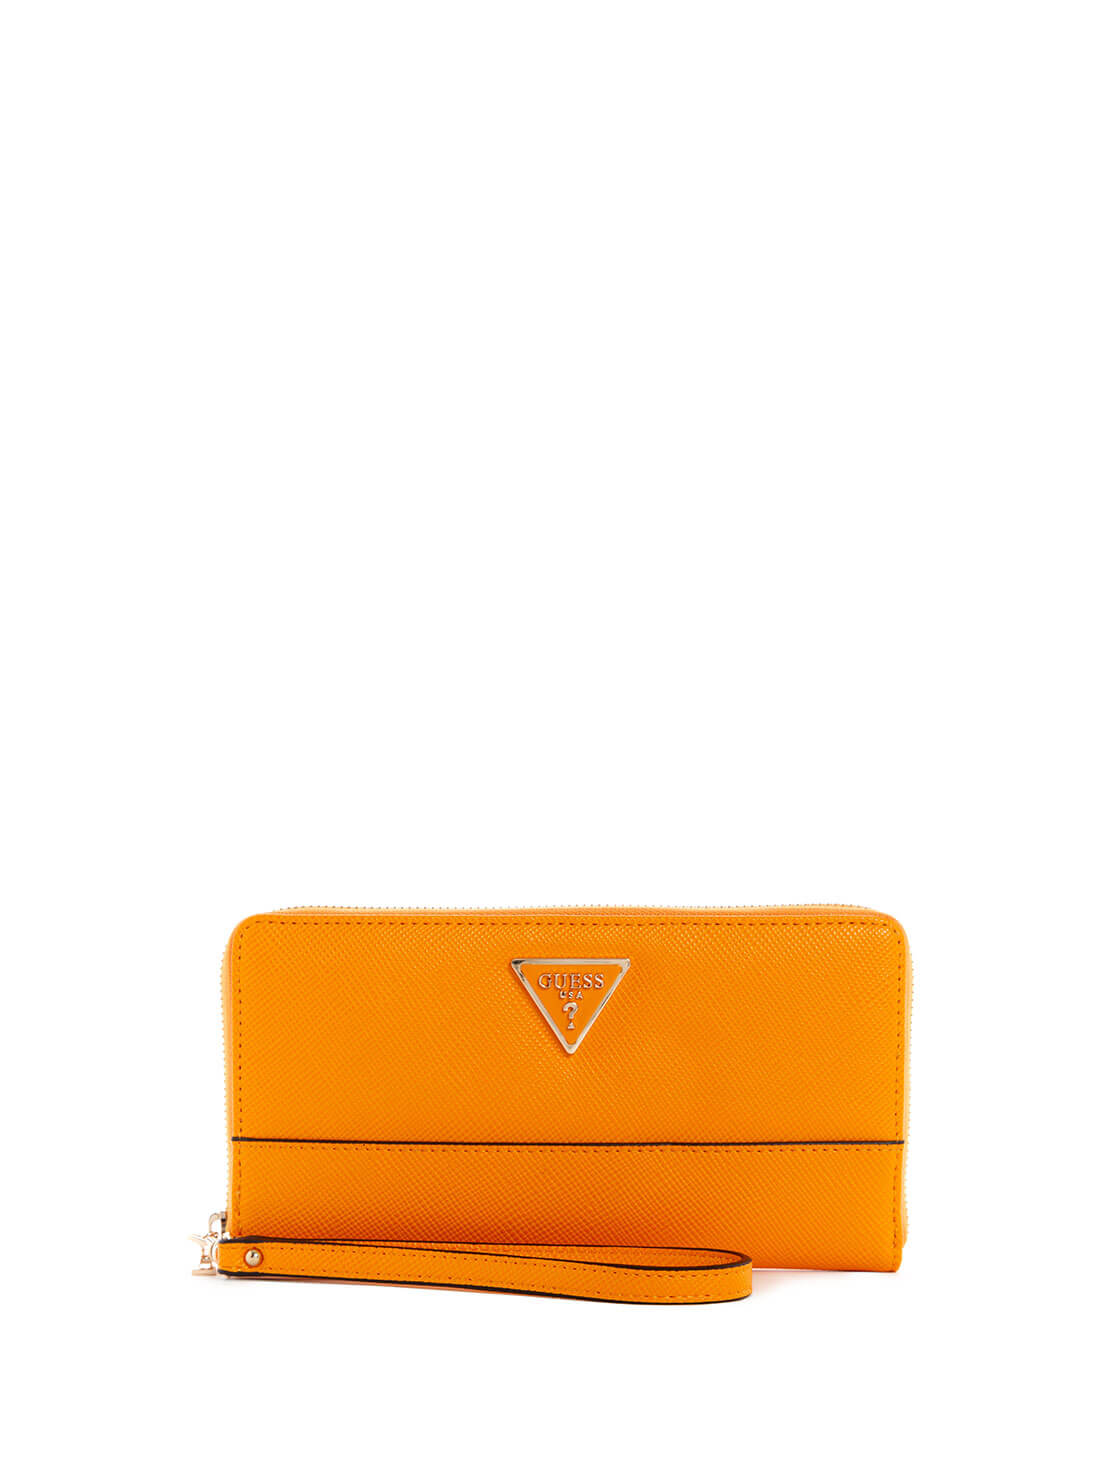 GUESS Womens  Mango Orange Noelle Cheque Organiser Wallet ZG787963 Front View